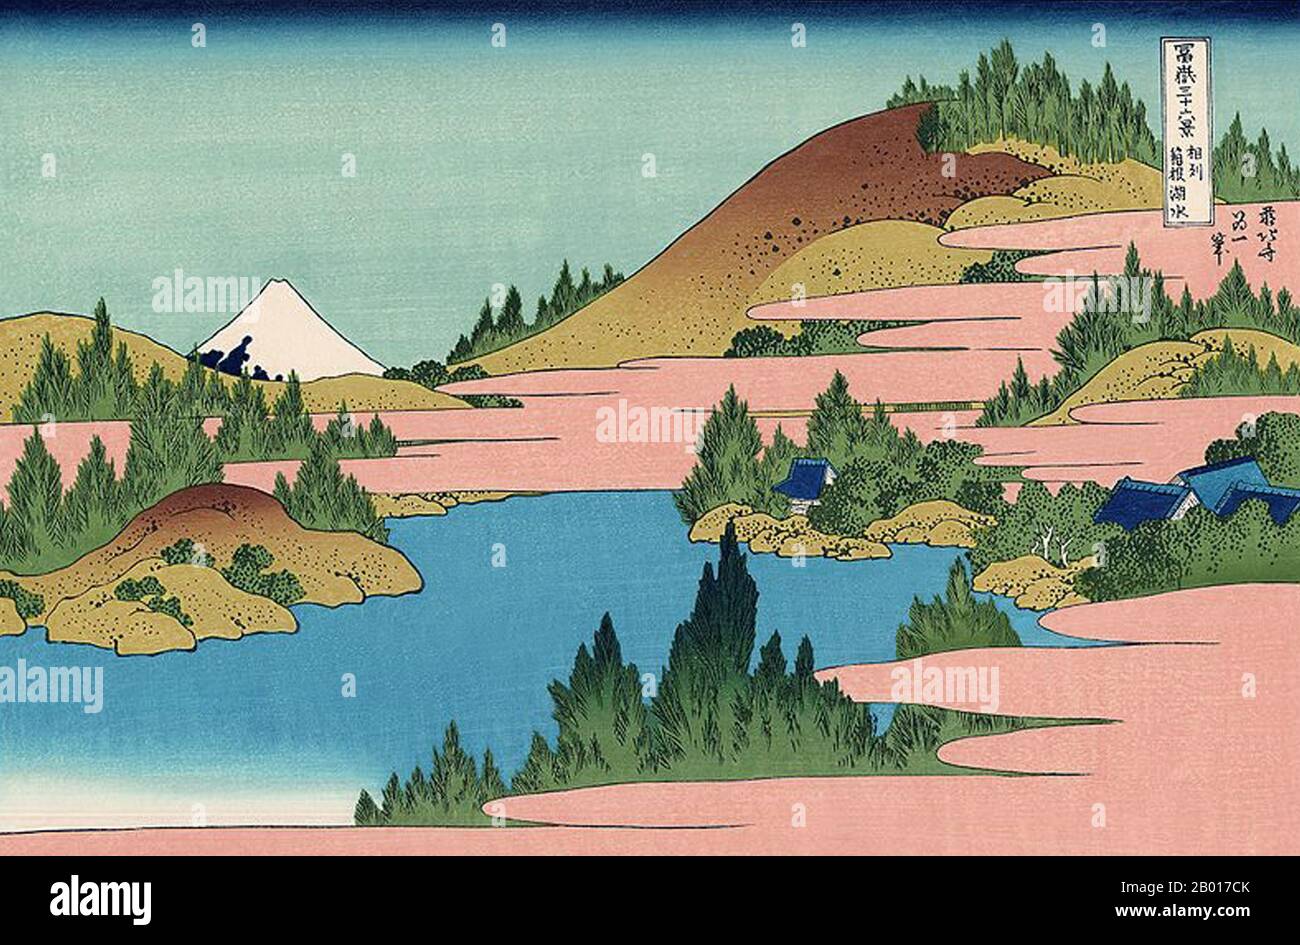 Japan: ‘Hakone Lake in Sagami Province'. Ukiyo-e woodblock print from the series ‘Thirty-Six Views of Mount Fuji’ by Katsushika Hokusai (31 October 1760 - 10 May 1849), 1830.  ‘Thirty-six Views of Mount Fuji’ is an ‘ukiyo-e’ series of woodcut prints by Japanese artist Katsushika Hokusai. The series depicts Mount Fuji in differing seasons and weather conditions from a variety of places and distances. It actually consists of 46 prints created between 1826 and 1833. The first 36 were included in the original publication and, due to their popularity, 10 more were added. Stock Photo